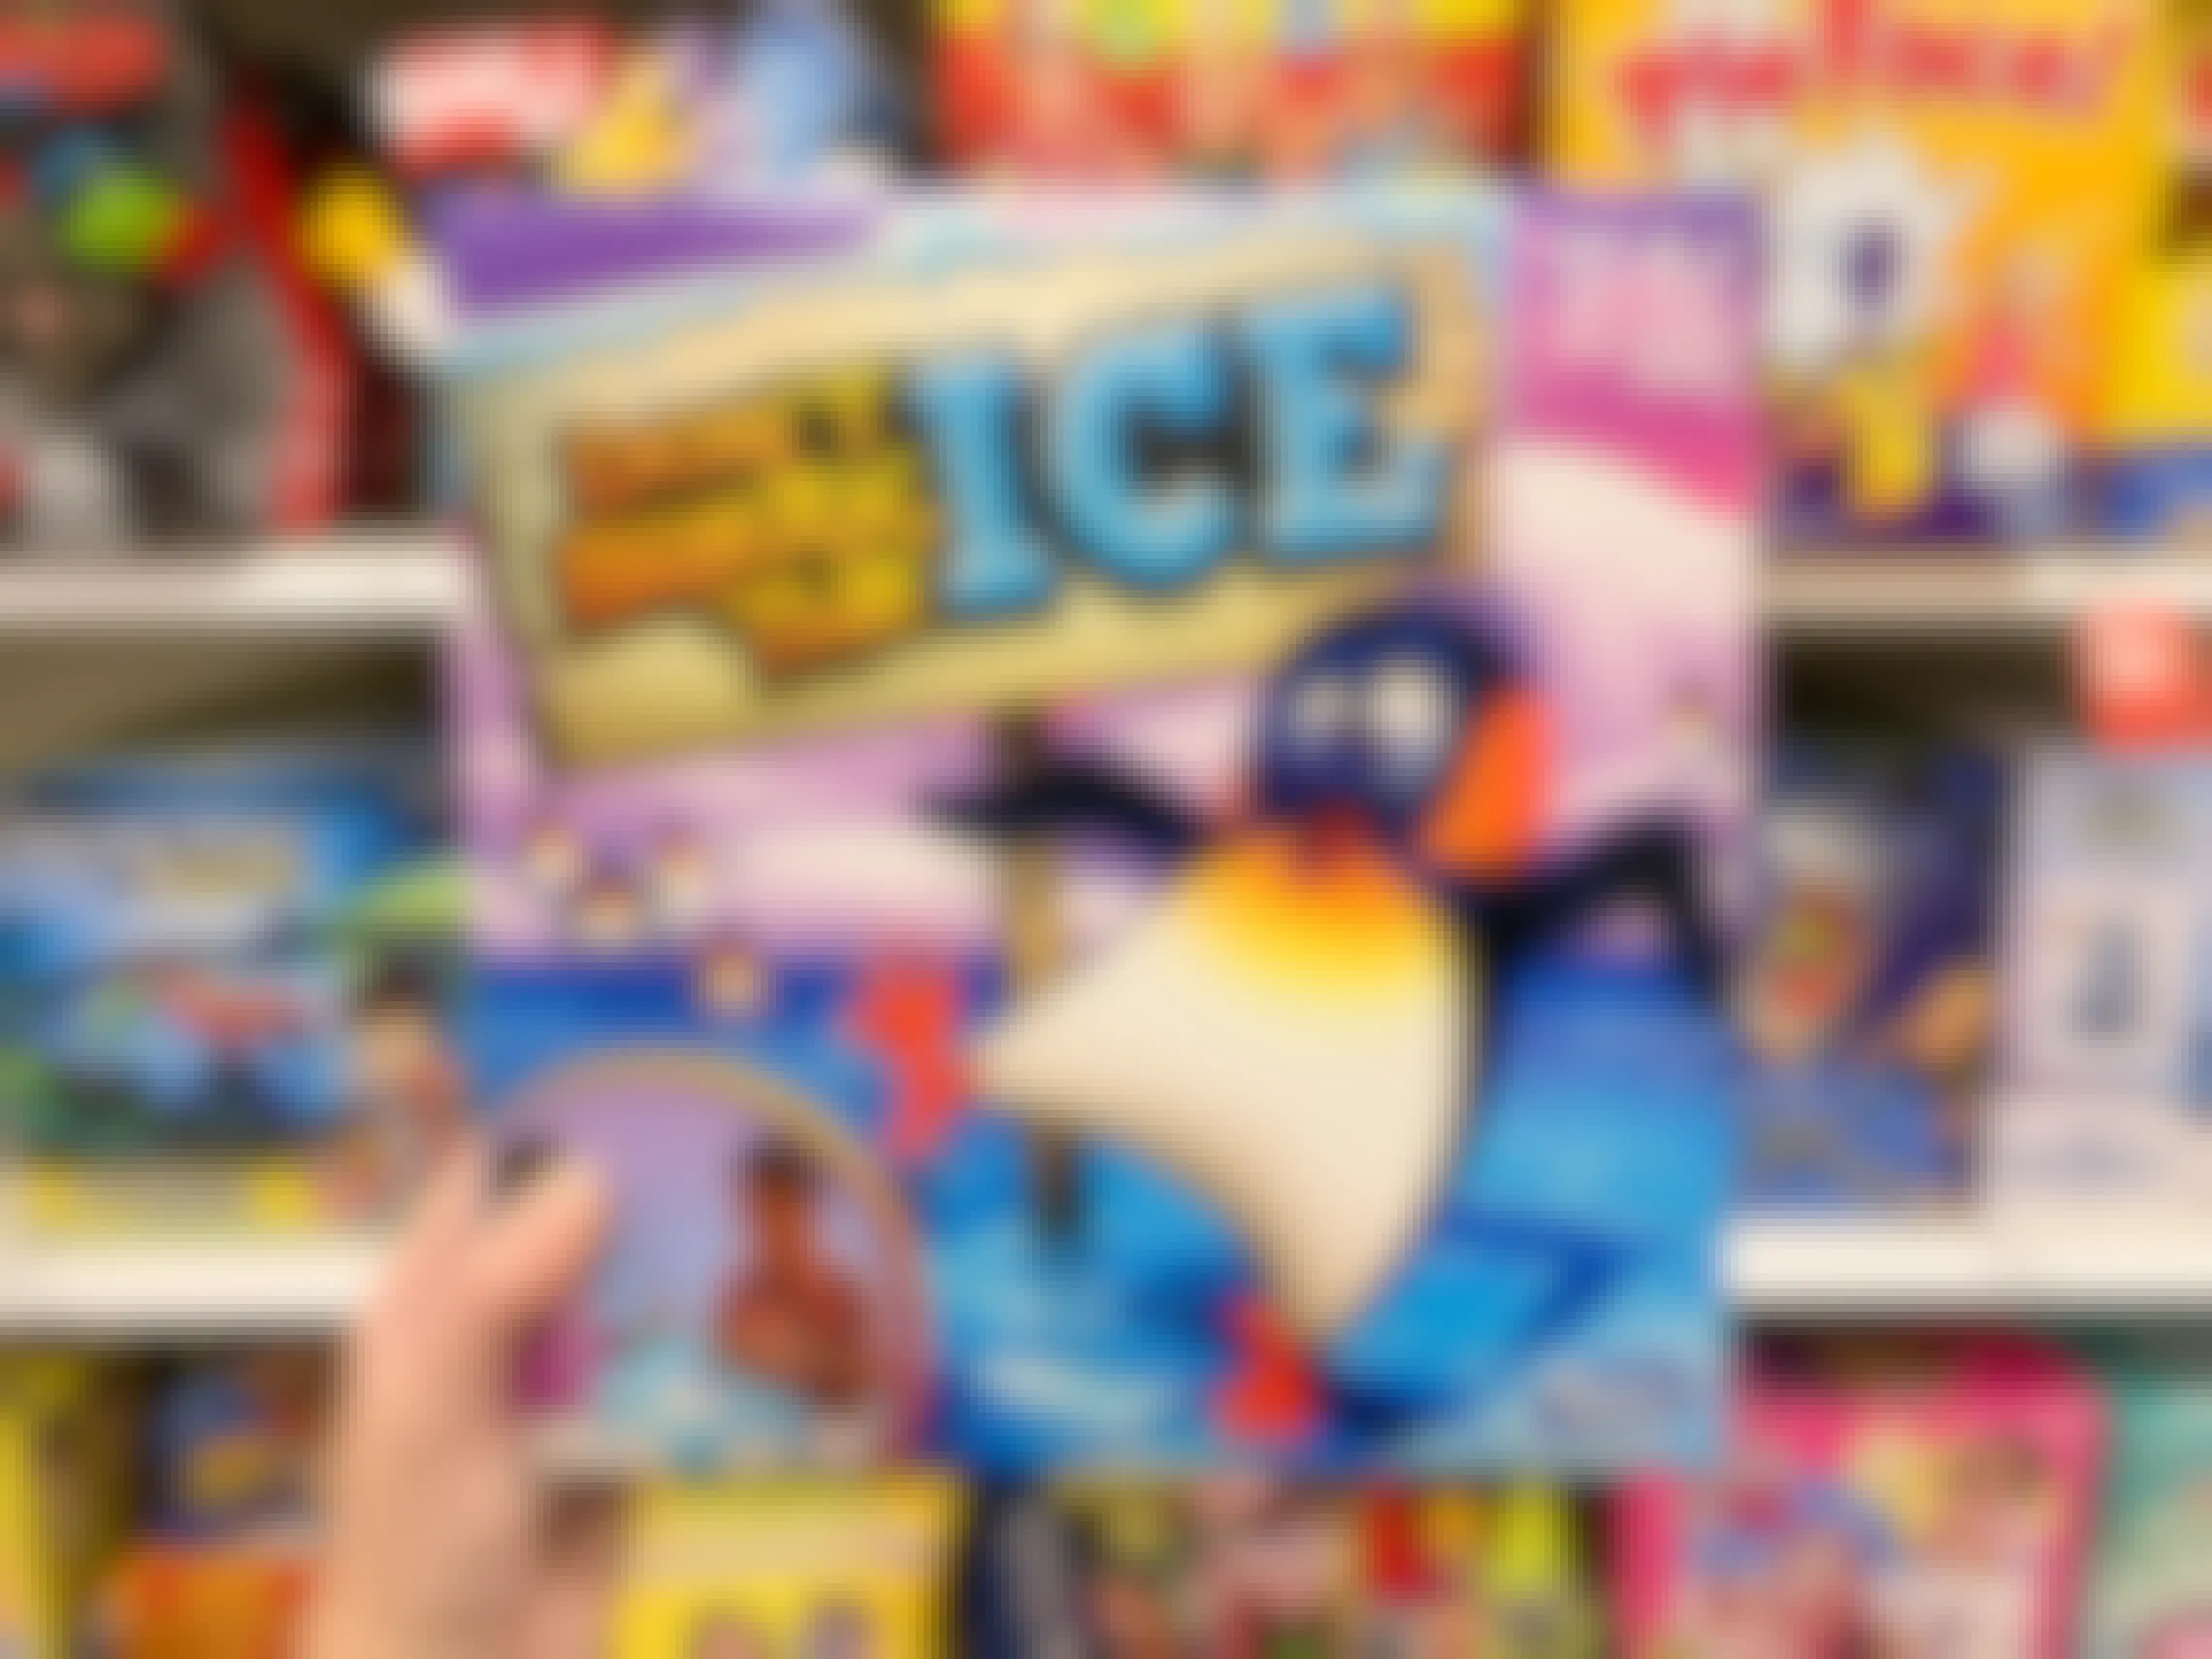 Don't break the ice board game at target